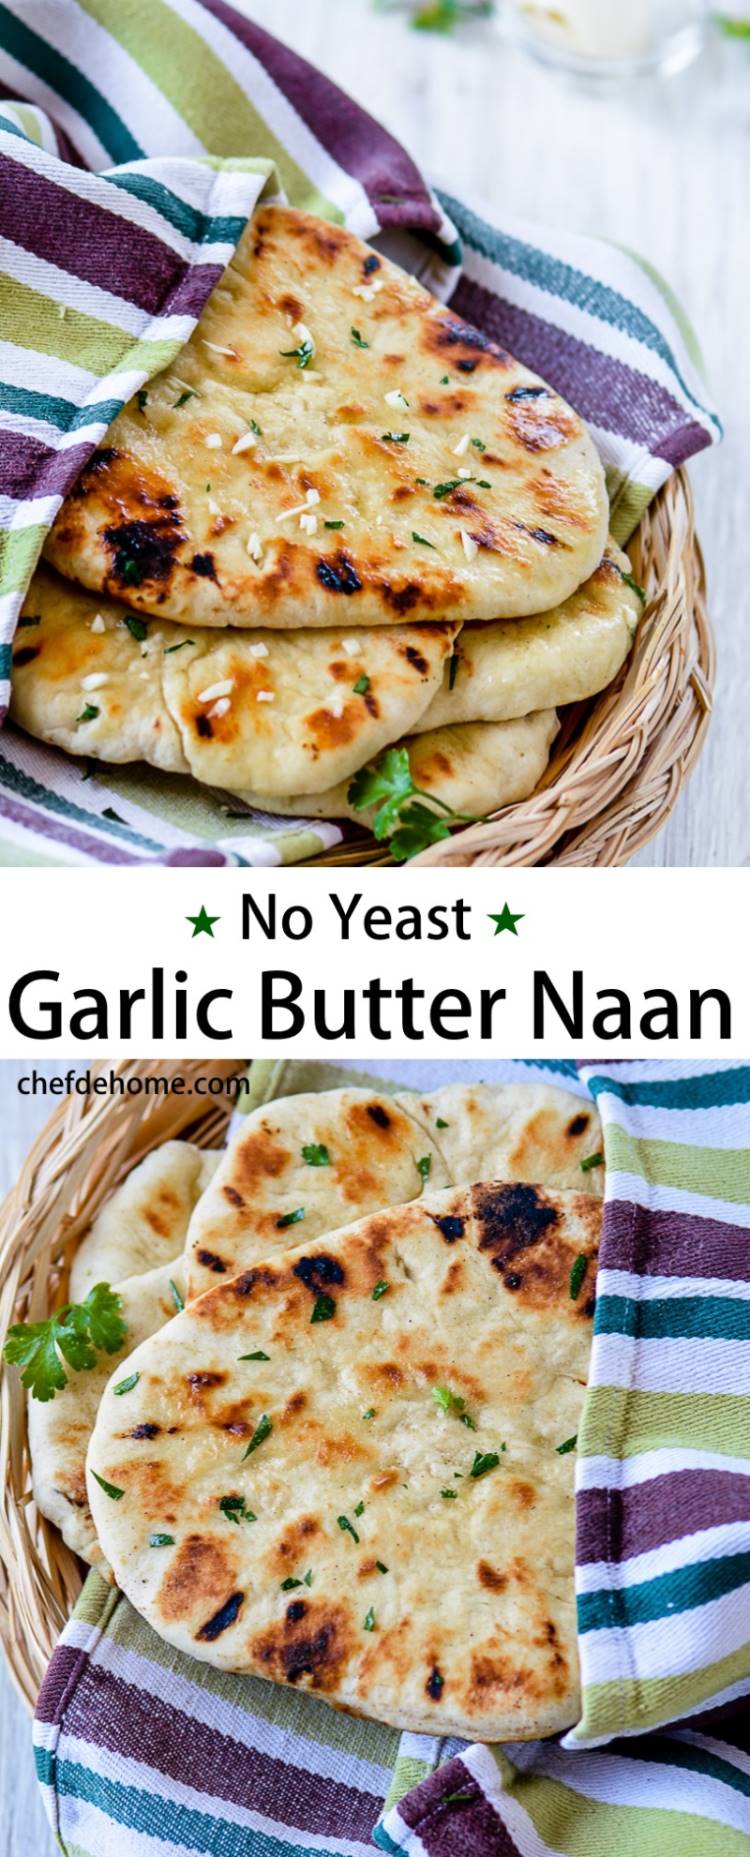 Instant Indian Garlic Naan Bread without yeast for an Easy Indian Dinner at Home | chefdehome.com